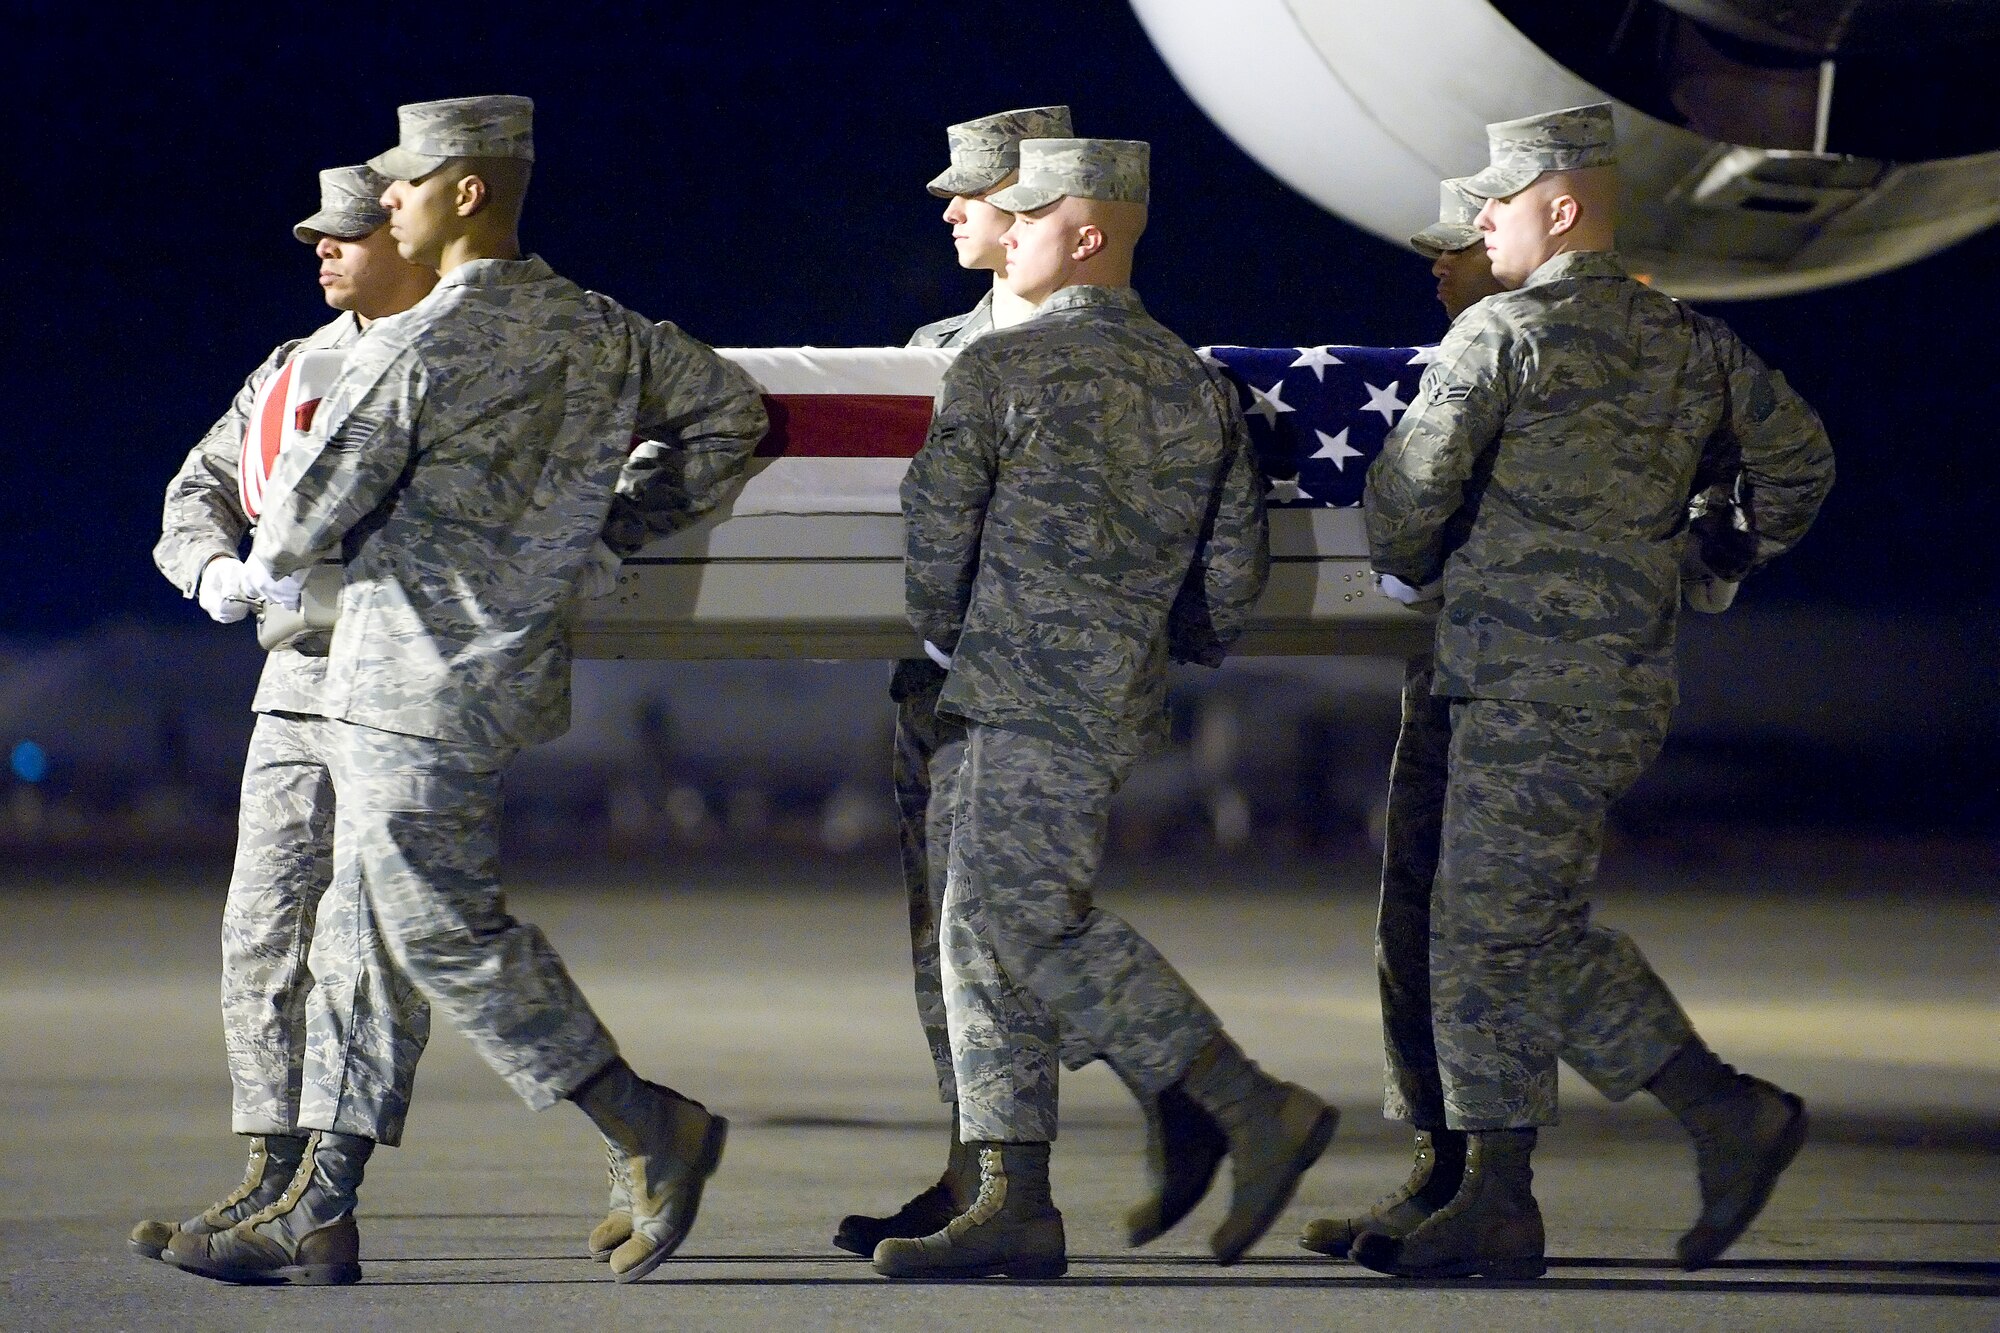 A U.S. Air Force carry team transfers the remains of Air Force 1st Lt. Justin J. Wilkens of Bend, Ore., at Dover Air Force Base, Del., Feb. 21, 2012. Wilkens was assigned to the 34th Special Operations Squadron, Hurlburt Field, Fla. (U.S. Air Force photo/Adrian R. Rowan)
